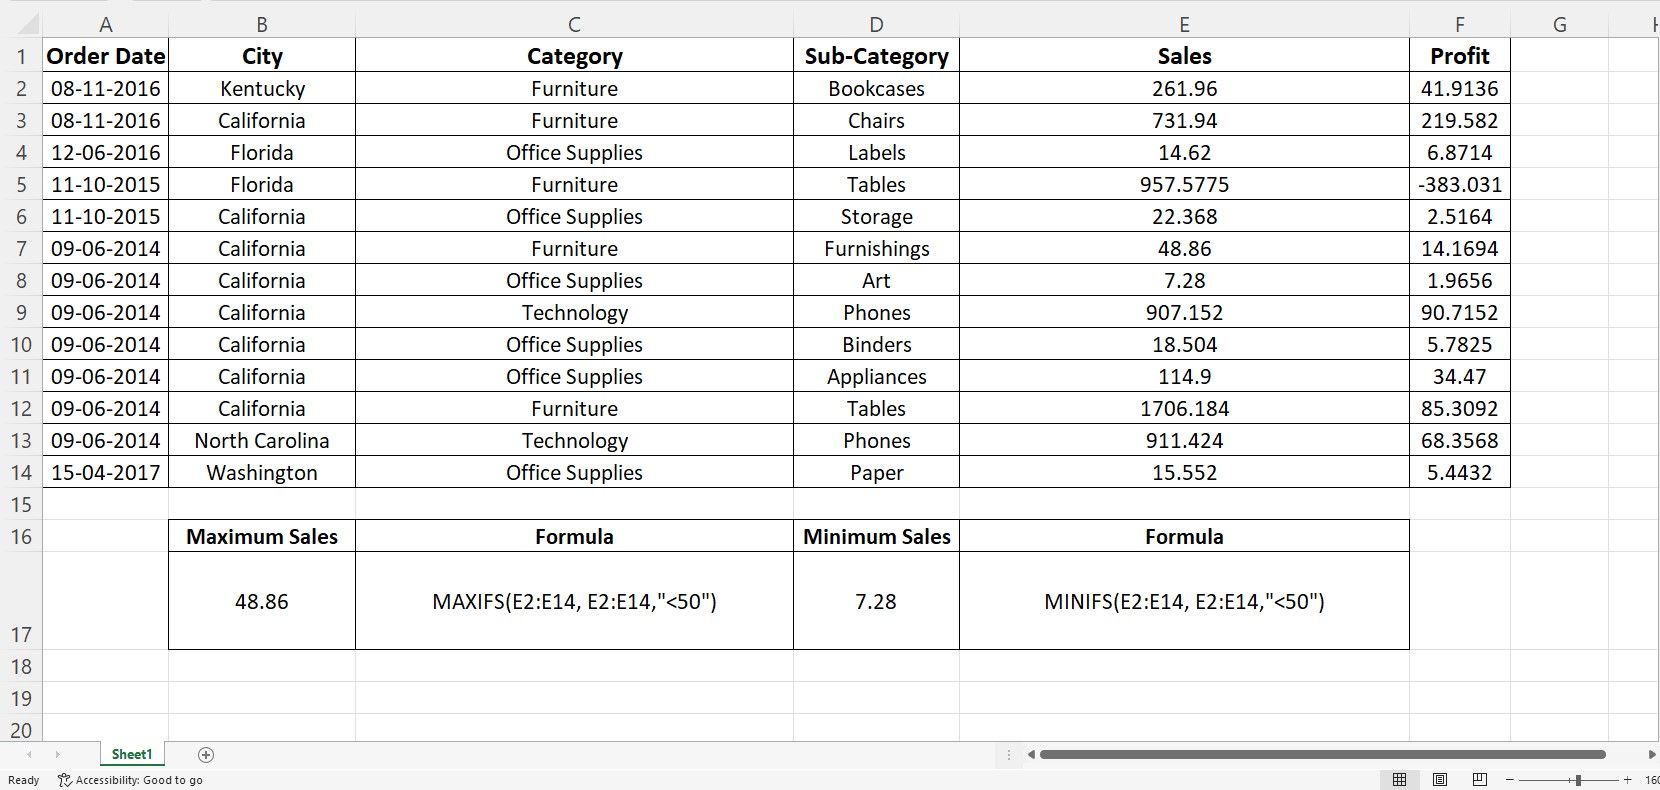 Excel interface showing the usage of maxifs and minifs functions